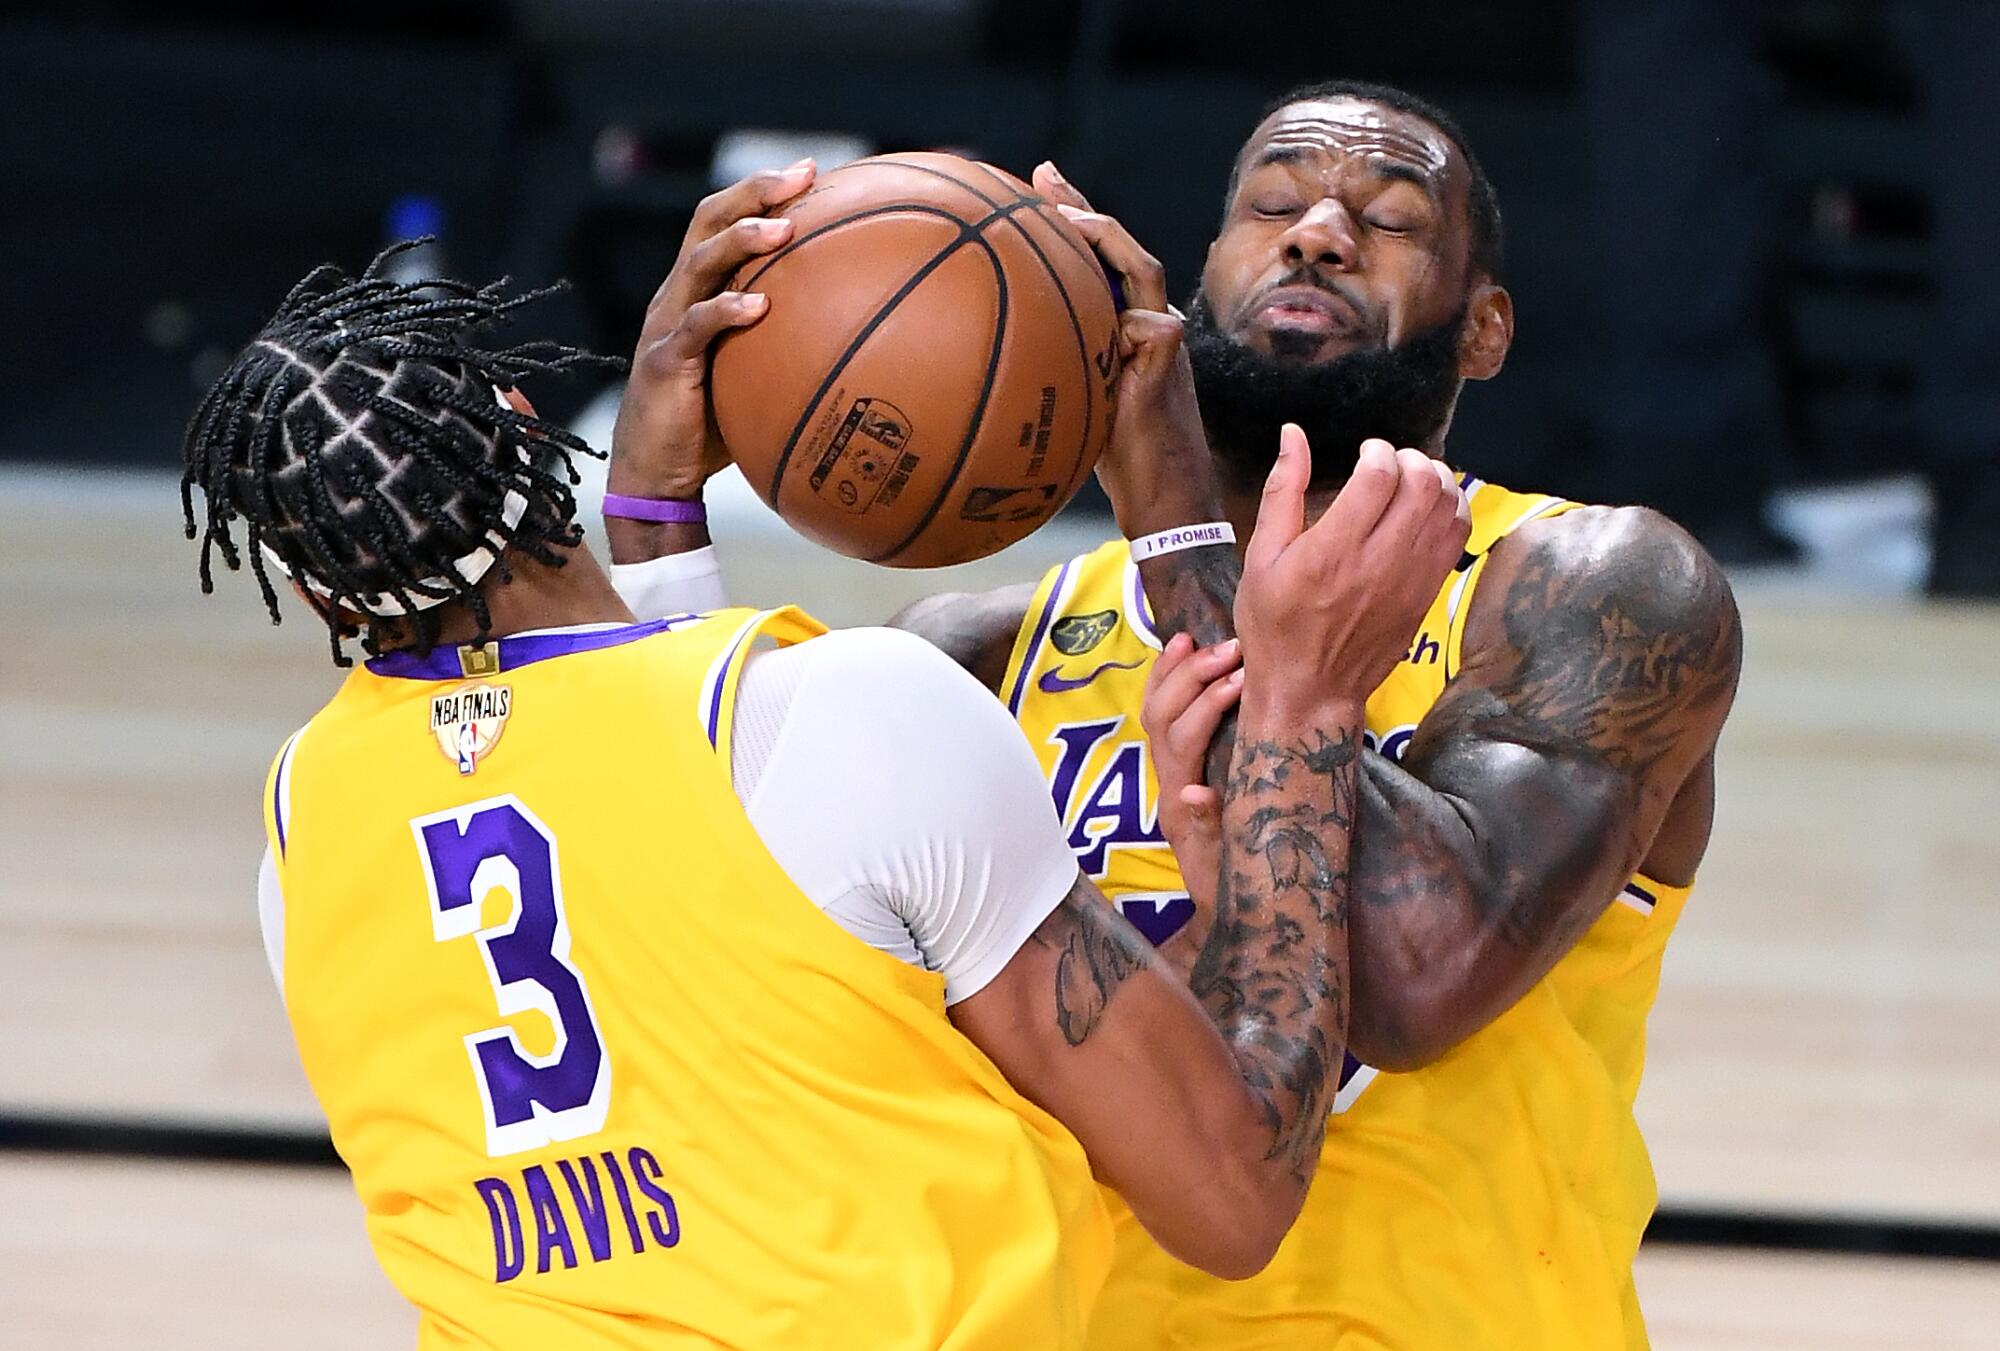 Lakers forwards LeBron James and Anthony Davis collide as they try to grab a rebound during Game 1.